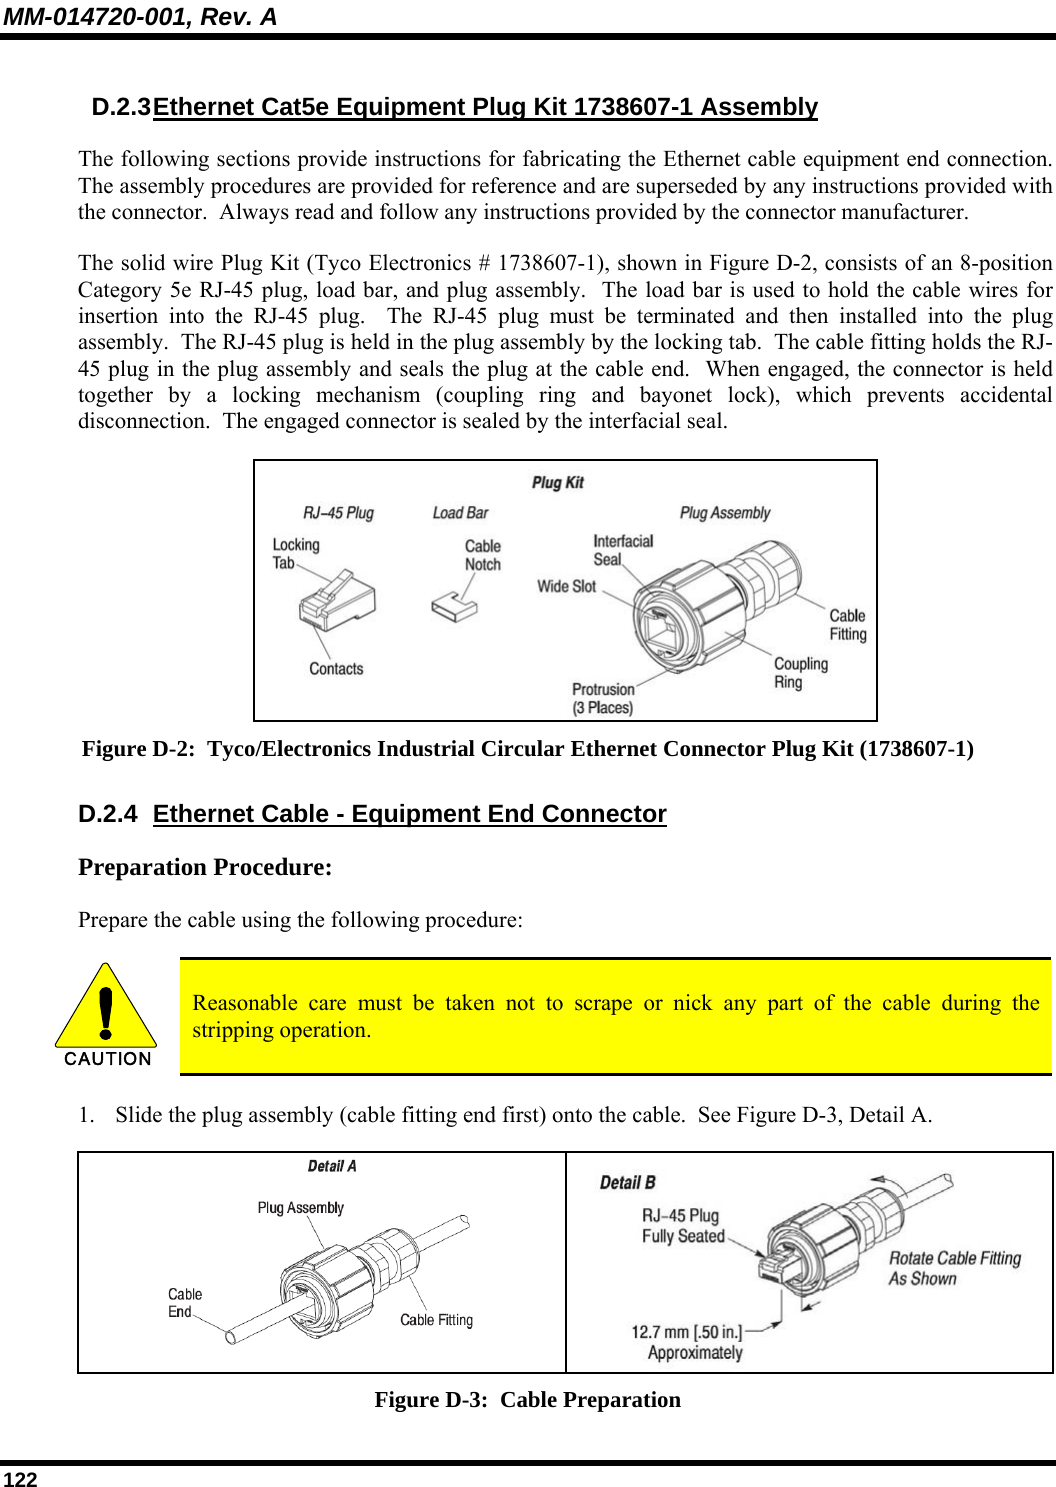 MM-014720-001, Rev. A 122 D.2.3 Ethernet Cat5e Equipment Plug Kit 1738607-1 Assembly The following sections provide instructions for fabricating the Ethernet cable equipment end connection.  The assembly procedures are provided for reference and are superseded by any instructions provided with the connector.  Always read and follow any instructions provided by the connector manufacturer. The solid wire Plug Kit (Tyco Electronics # 1738607-1), shown in Figure D-2, consists of an 8-position Category 5e RJ-45 plug, load bar, and plug assembly.  The load bar is used to hold the cable wires for insertion into the RJ-45 plug.  The RJ-45 plug must be terminated and then installed into the plug assembly.  The RJ-45 plug is held in the plug assembly by the locking tab.  The cable fitting holds the RJ-45 plug in the plug assembly and seals the plug at the cable end.  When engaged, the connector is held together by a locking mechanism (coupling ring and bayonet lock), which prevents accidental disconnection.  The engaged connector is sealed by the interfacial seal.  Figure D-2:  Tyco/Electronics Industrial Circular Ethernet Connector Plug Kit (1738607-1) D.2.4  Ethernet Cable - Equipment End Connector Preparation Procedure: Prepare the cable using the following procedure:  CAUTION  Reasonable care must be taken not to scrape or nick any part of the cable during the stripping operation. 1. Slide the plug assembly (cable fitting end first) onto the cable.  See Figure D-3, Detail A.    Figure D-3:  Cable Preparation 